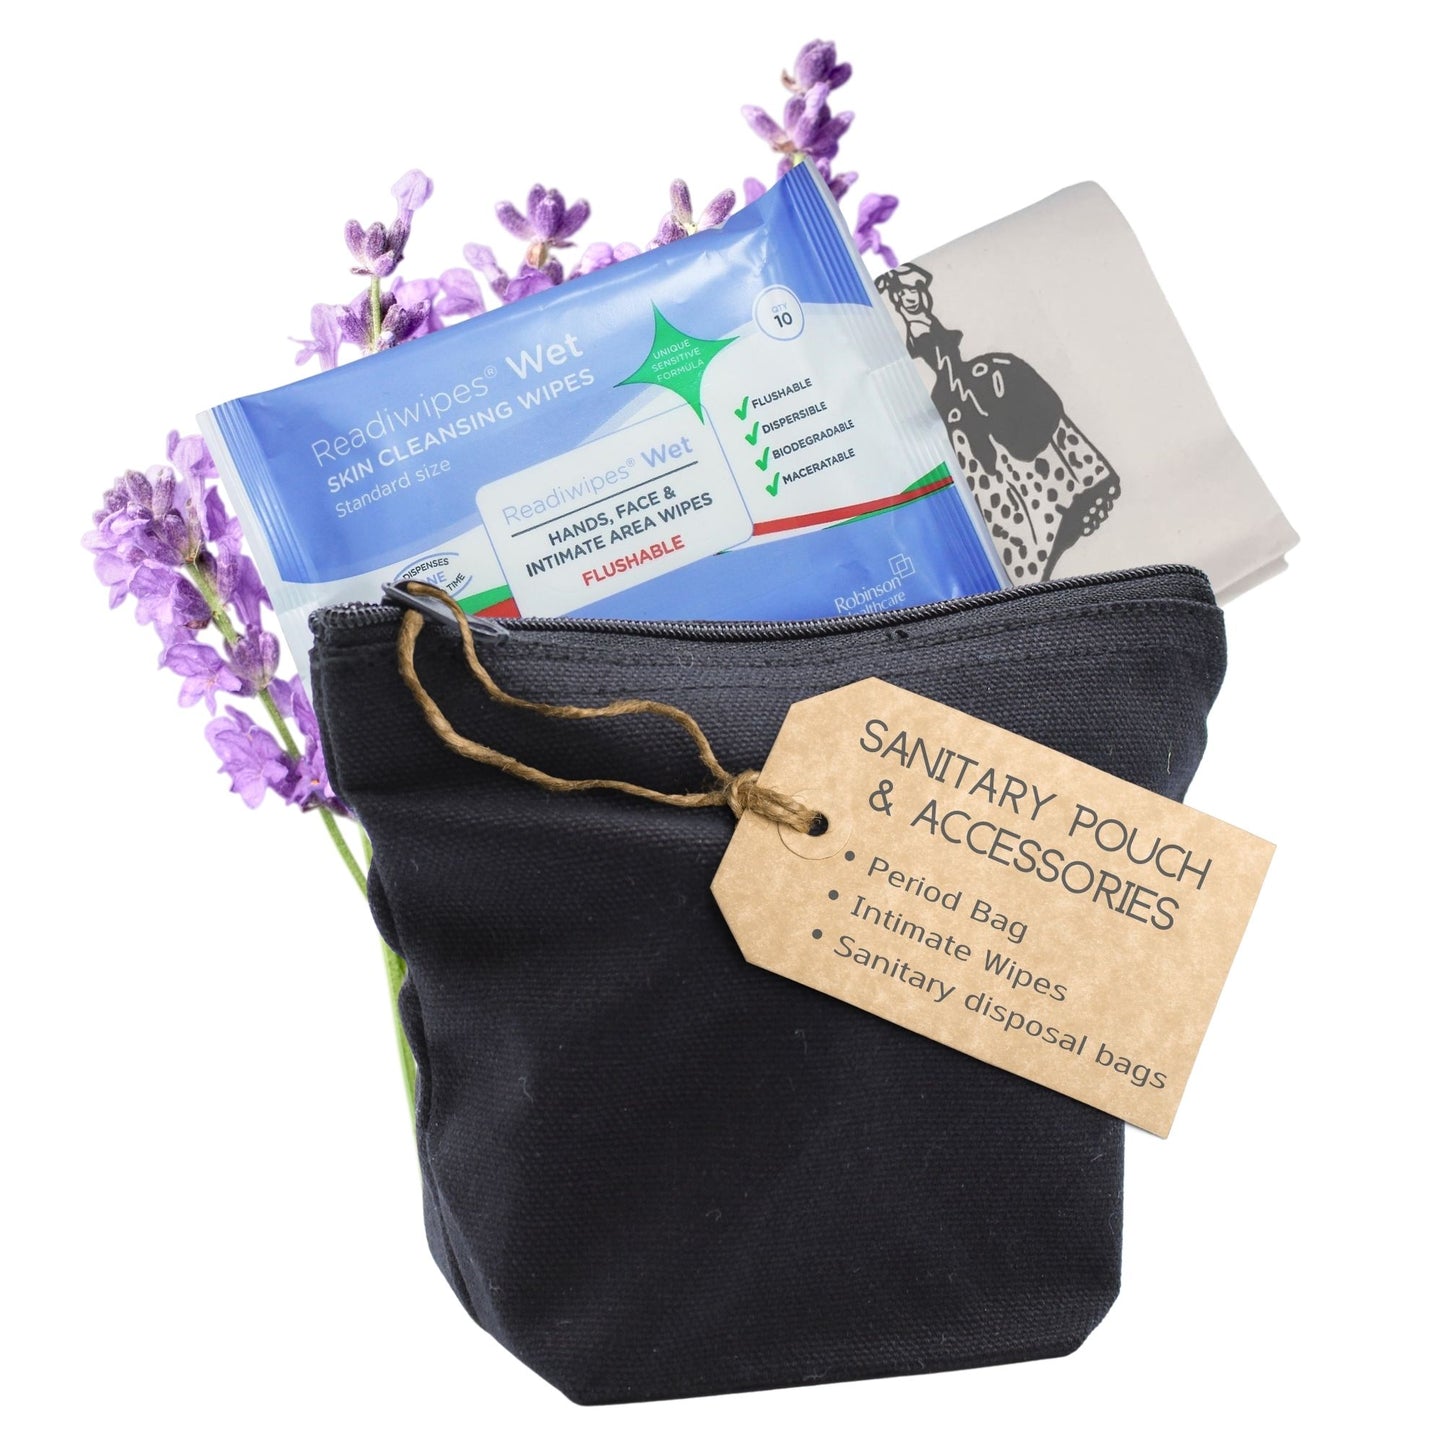 A Period Pack featuring a period pouch, feminine wipes, and paper sanitary disposal bags for convenient and discreet period care.